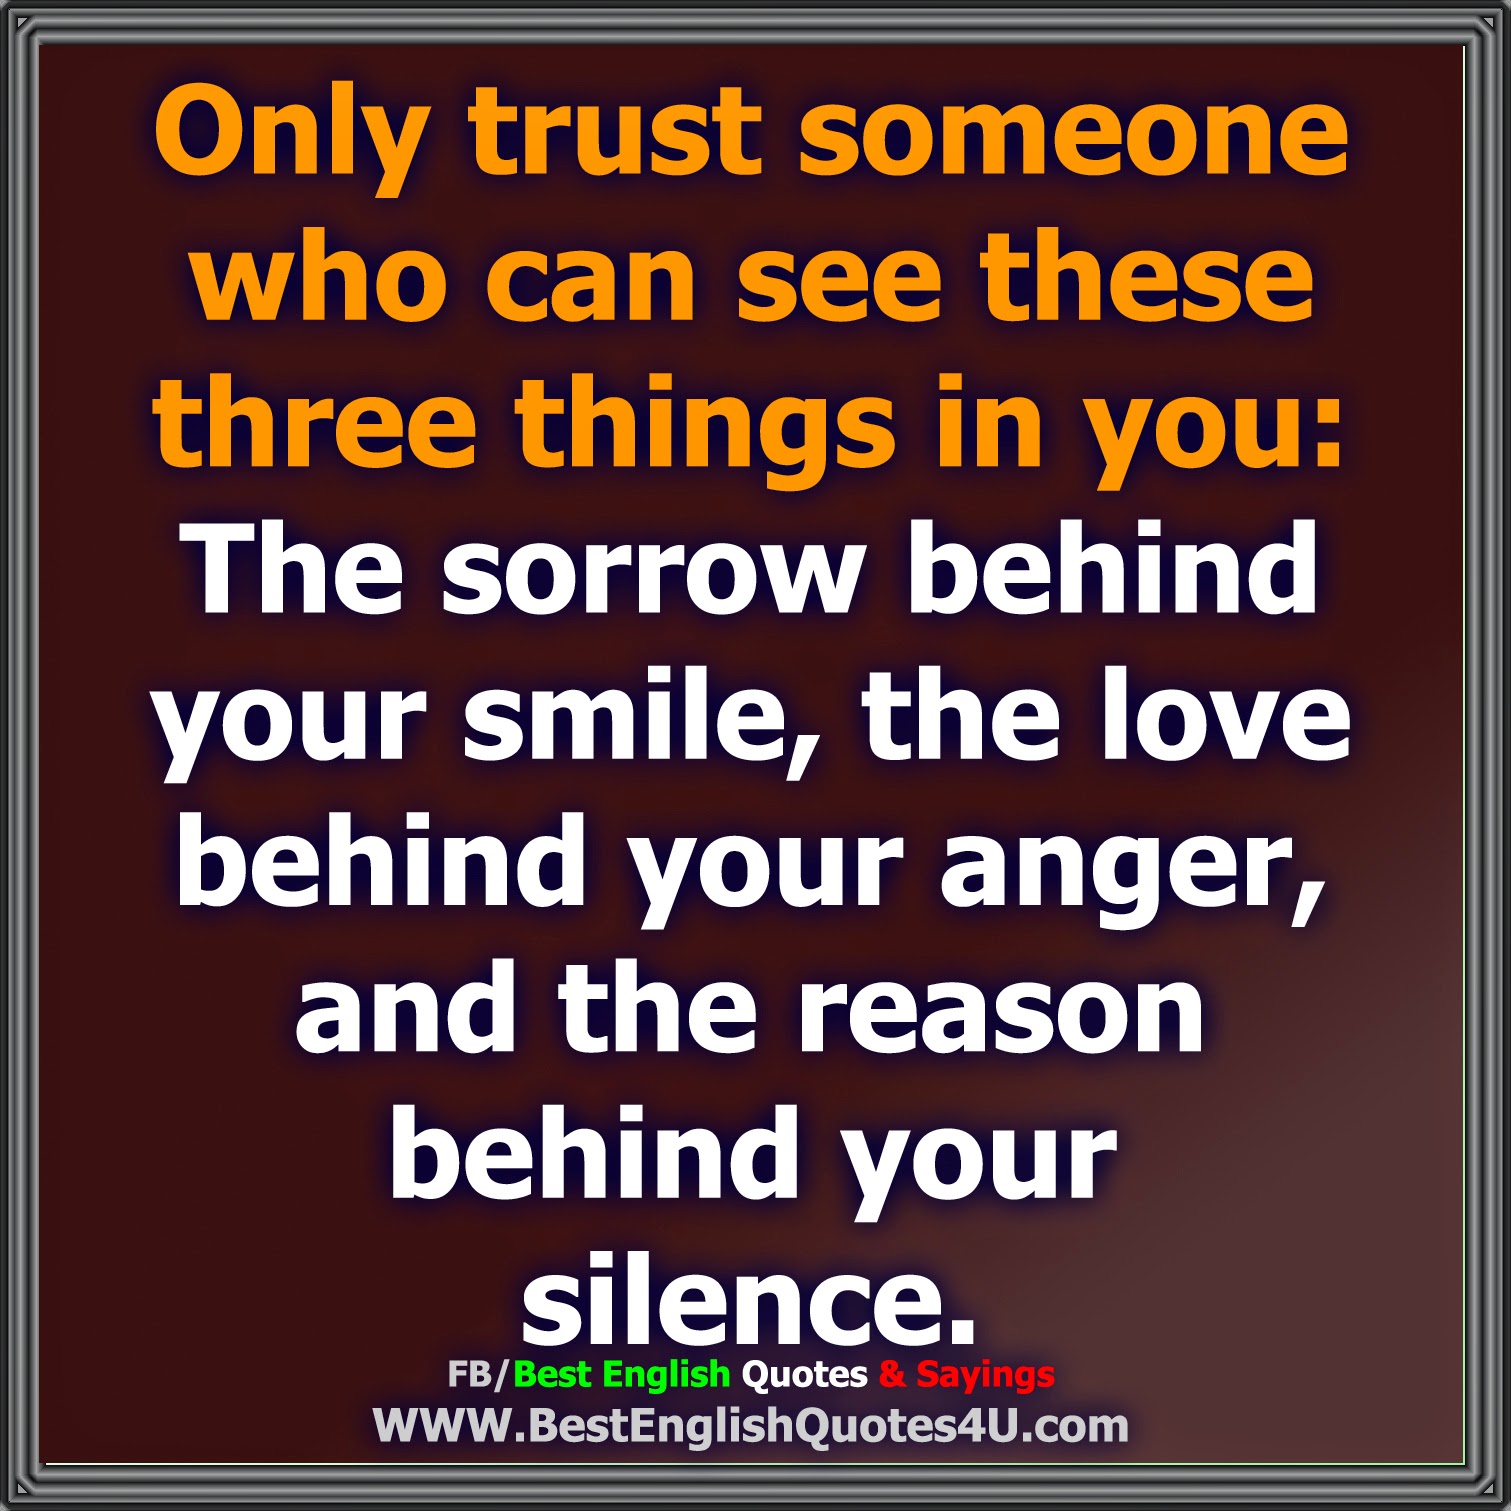 ly trust someone who can see these three things in you The sorrow behind your smile the love behind your anger and the reason behind your silence